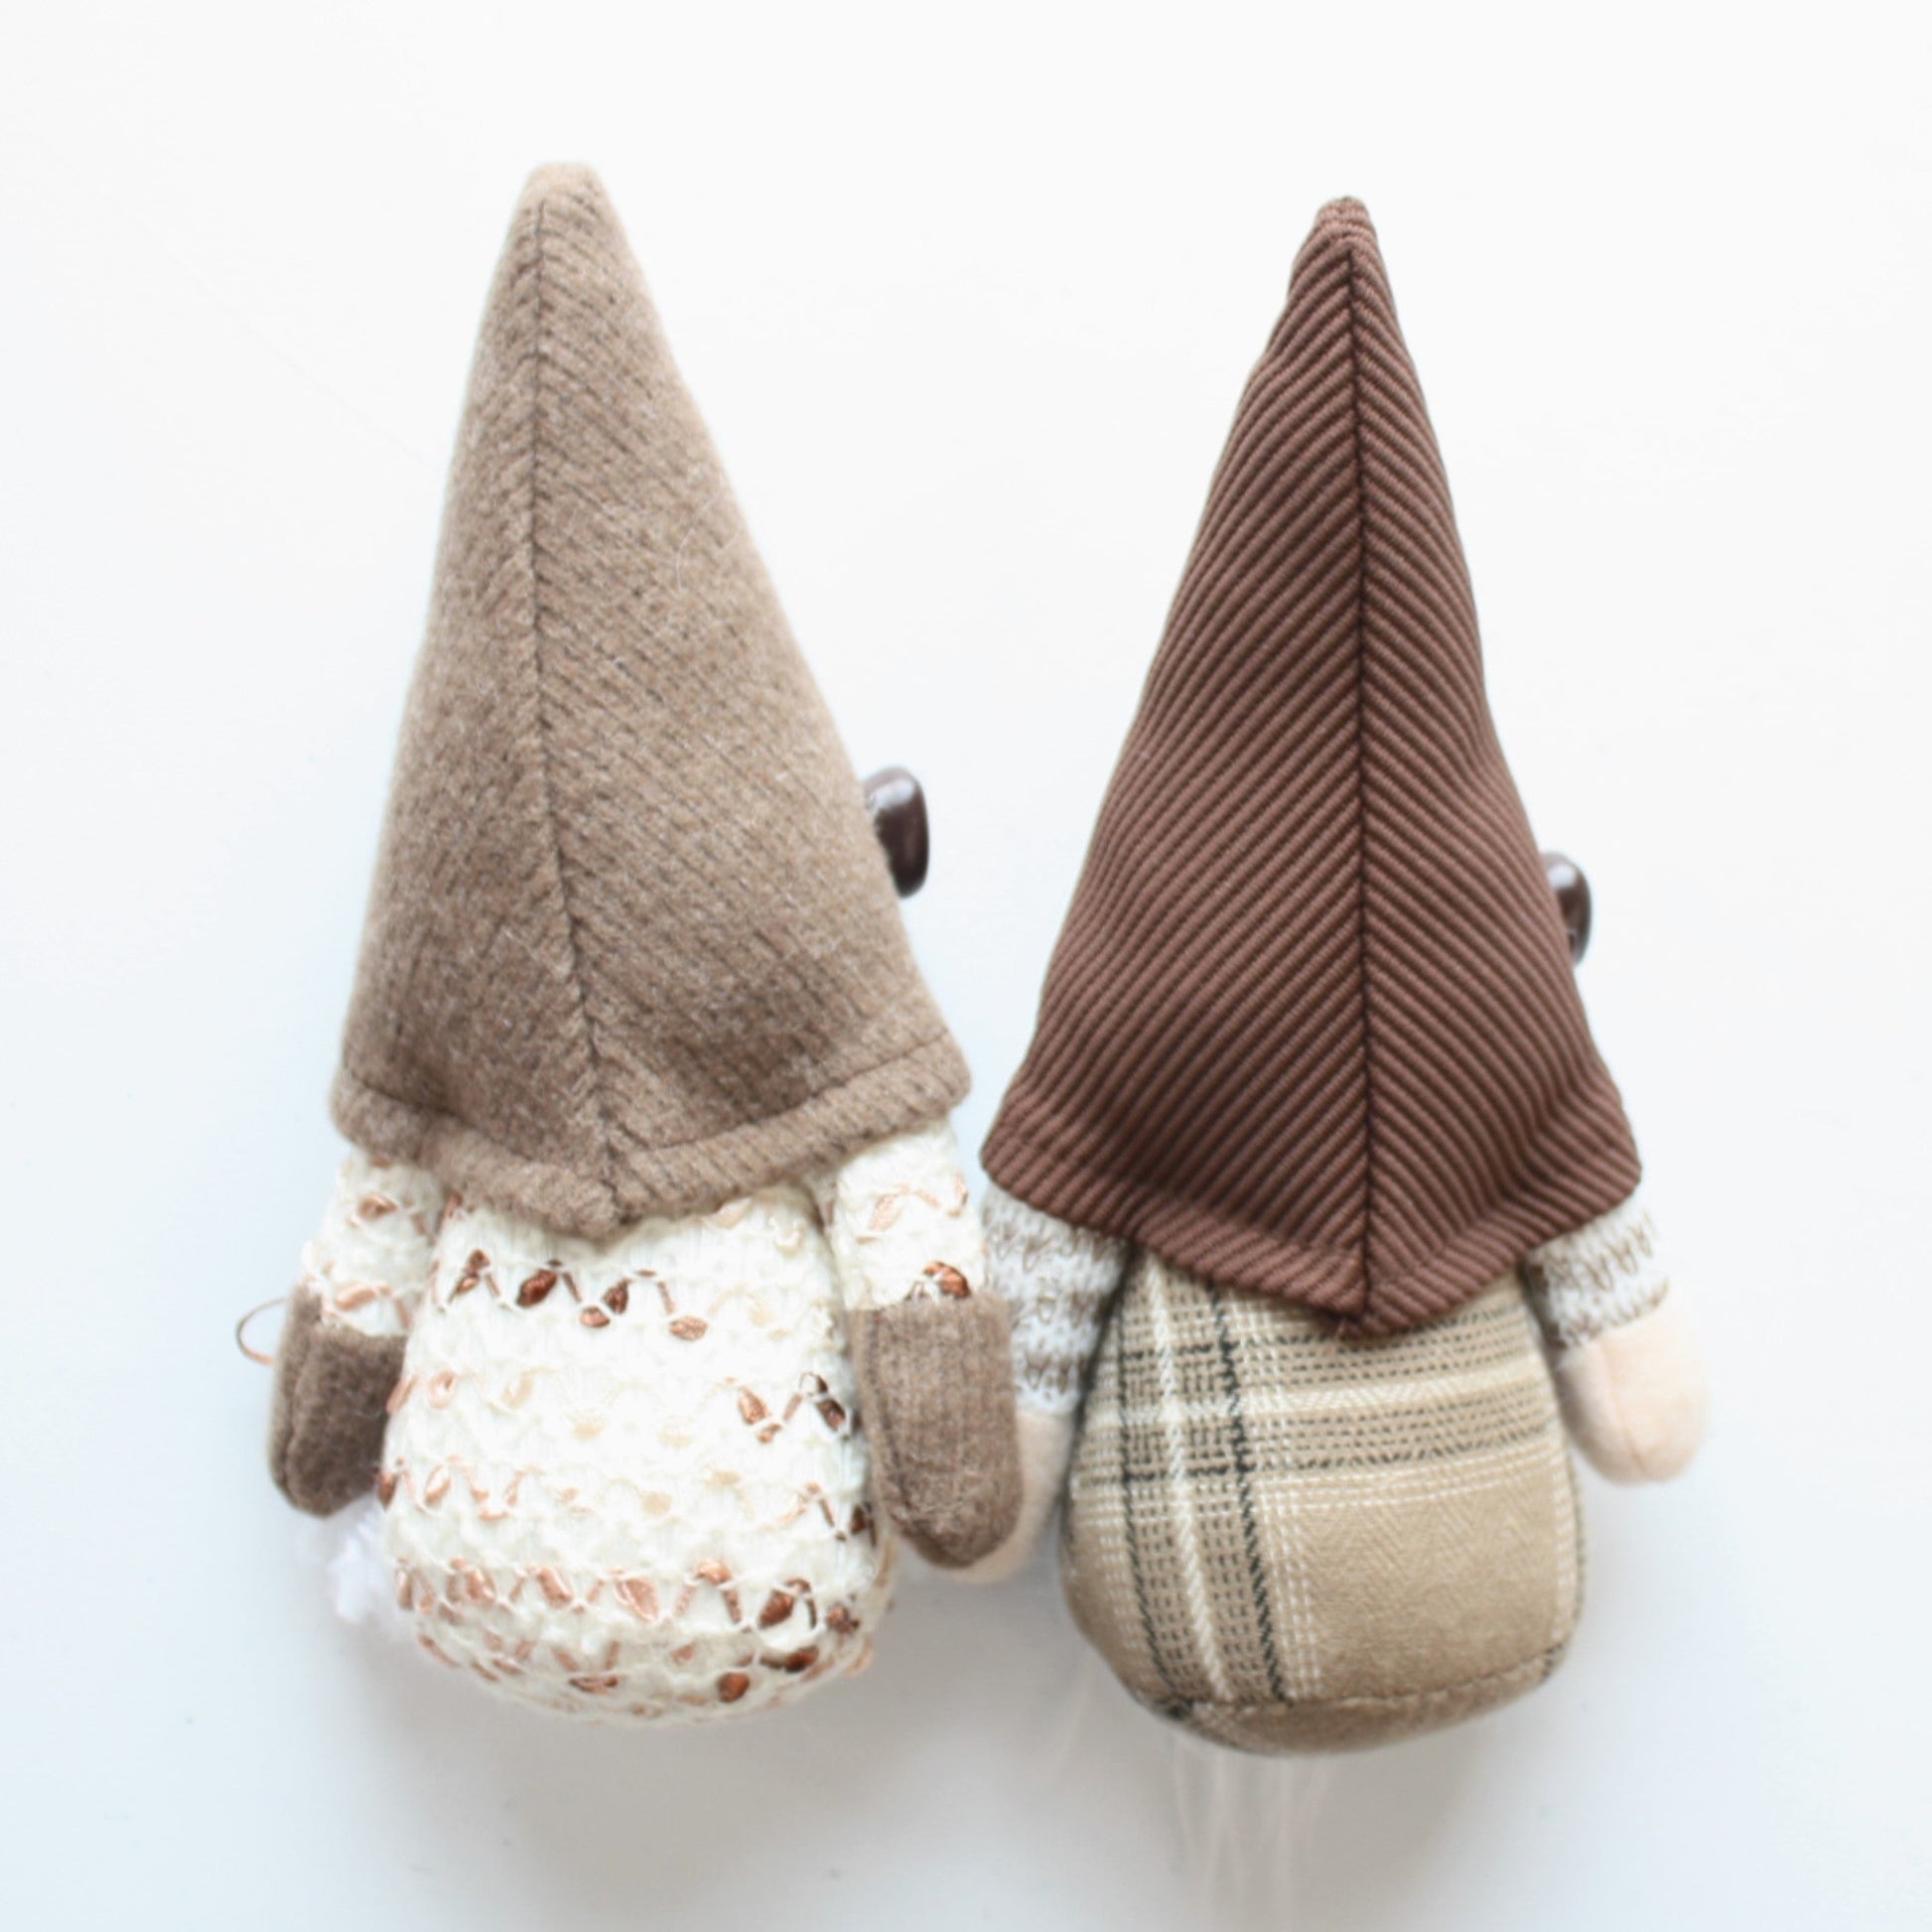 Pair of Handmade Coffee Gnomes Brother and Sister - Made in the USA